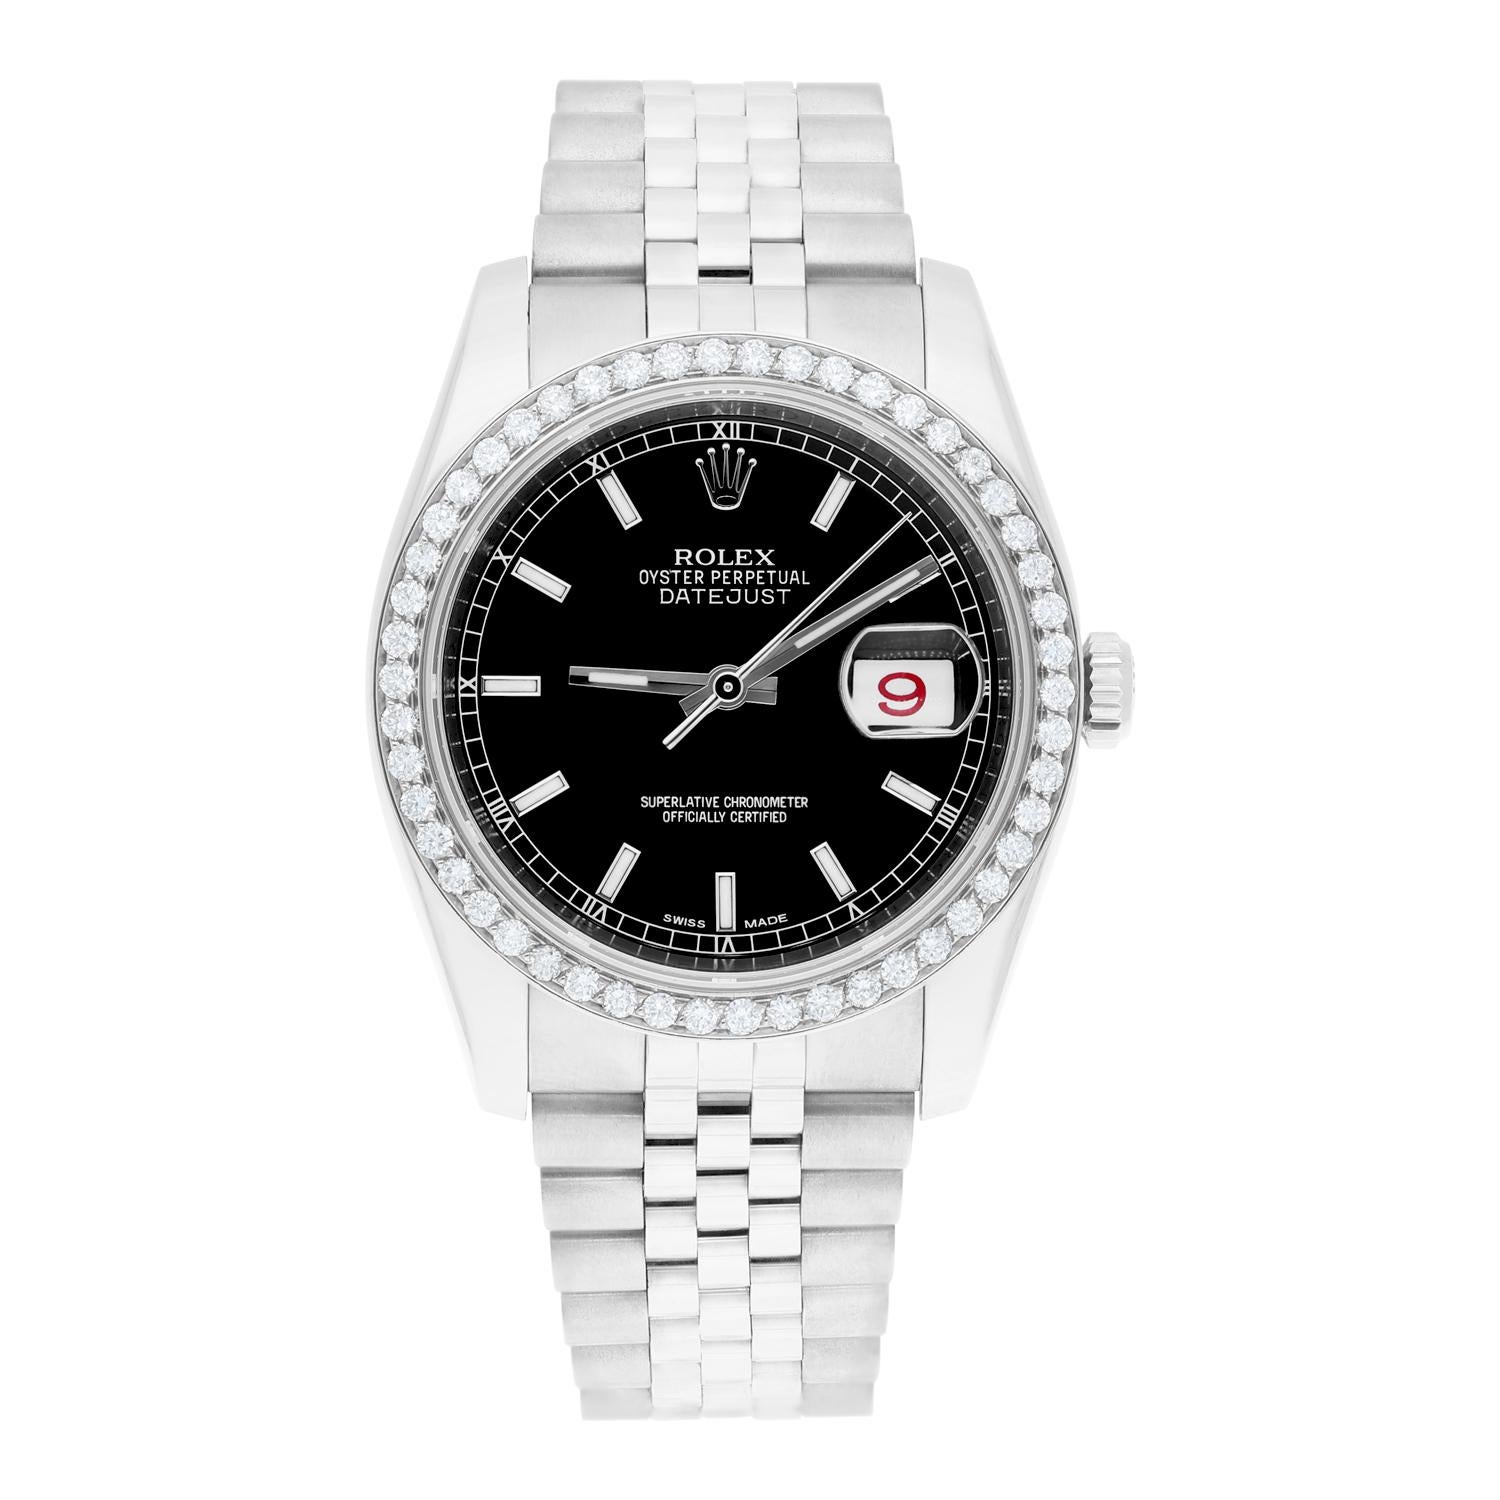 Brand: Rolex
Series: Datejust 
Model: 116234
Case Diameter: 36 mm
Bracelet: Jubilee band; stainless steel
Bezel: Custom Diamond Set
Dial: Black Index
Carat Weight: 1.32 carats in total diamond weight
The sale includes a Rolex box and an appraisal